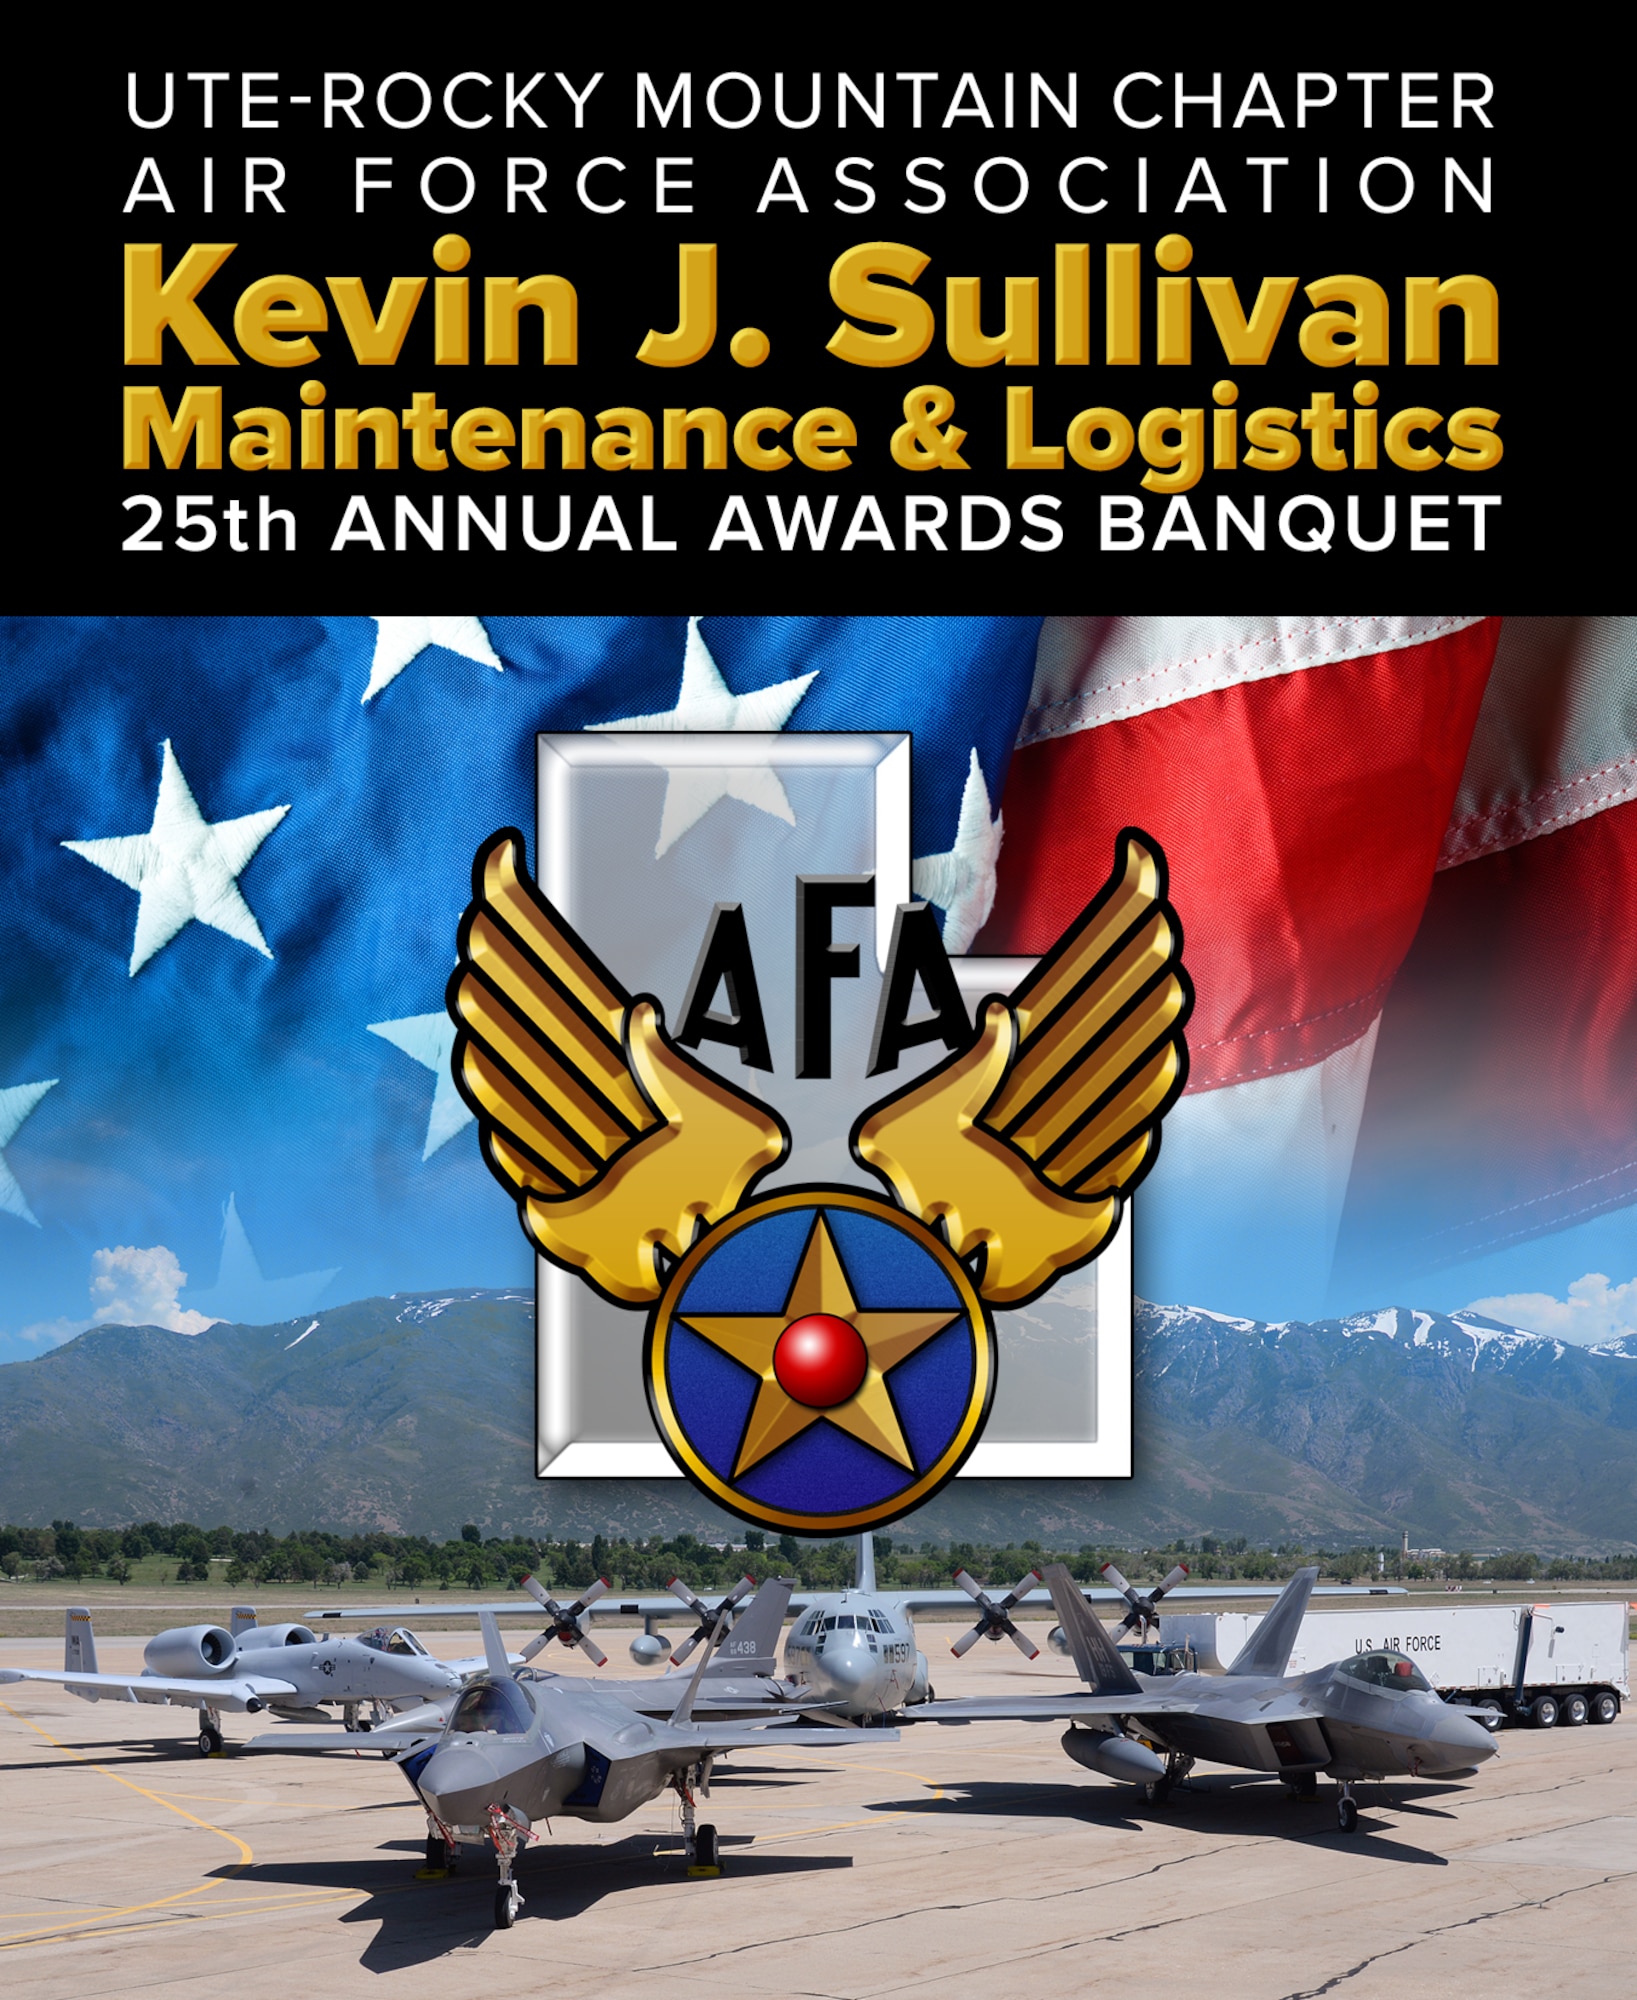 Graphic depicting the Ute-Rocky Mountain Chapter of the Air Force Association logo and 25th Annual Kevin J. Sullivan Awards Banquet title. (U.S. Air Force graphic be Kent Bingham)